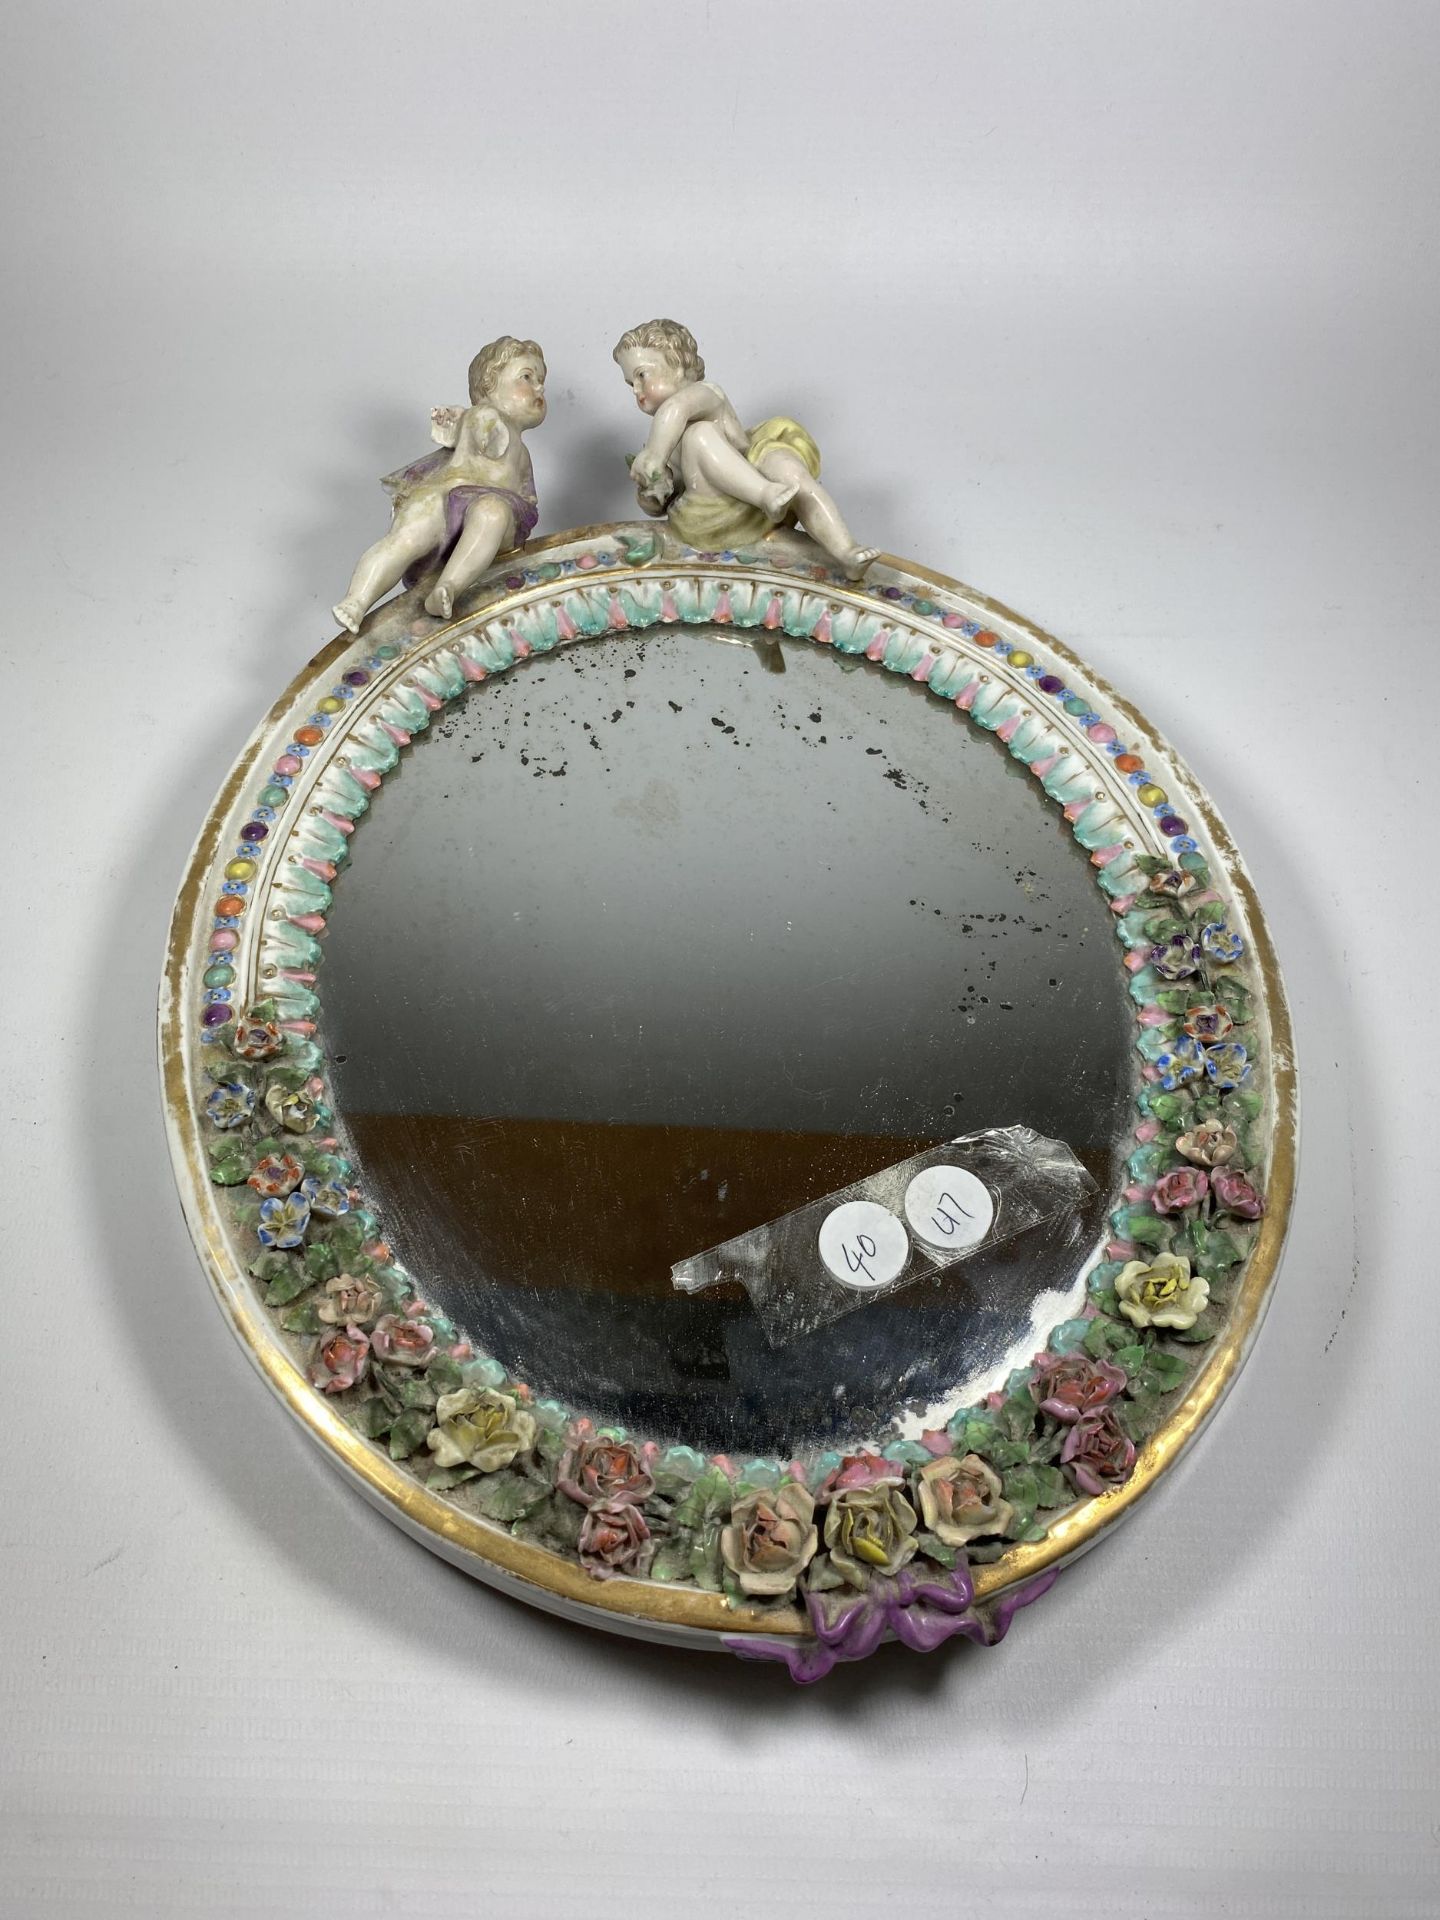 A CONTINENTAL PORCELAIN MIRROR WITH CHERUB AND FLORAL DESIGN